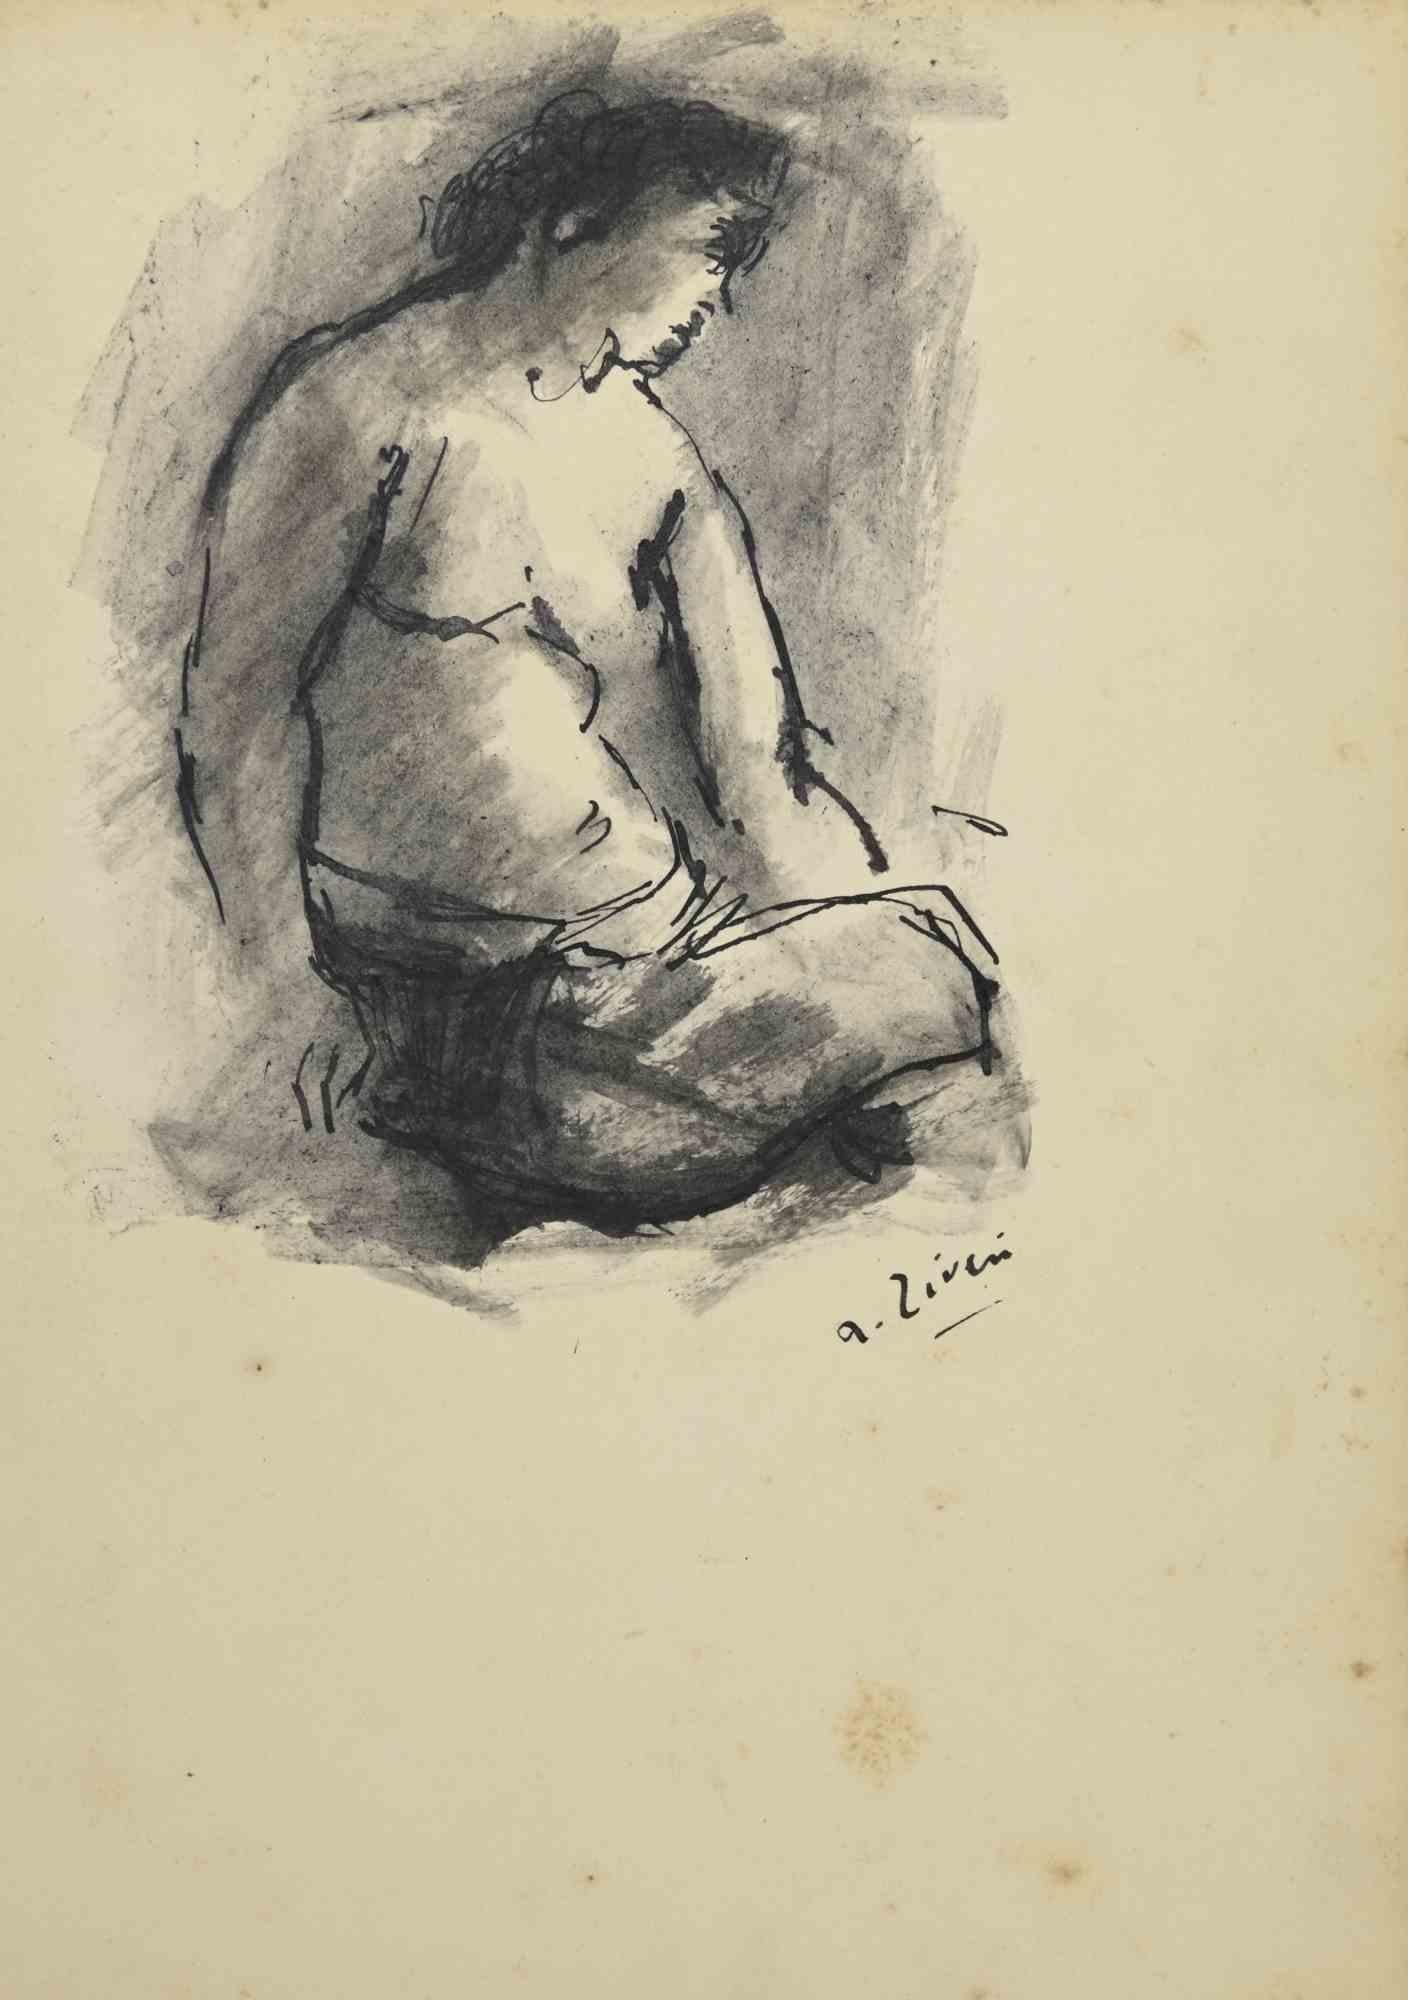 Nude is an original drawing realized by Alberto Ziveri in the 1930s.

Watercolor and ink on paper.

Hand-signed and dated.

In good conditions with slight foxing.

The artwork is represented through deft strokes masterly.

Alberto Ziveri (Rome,1908